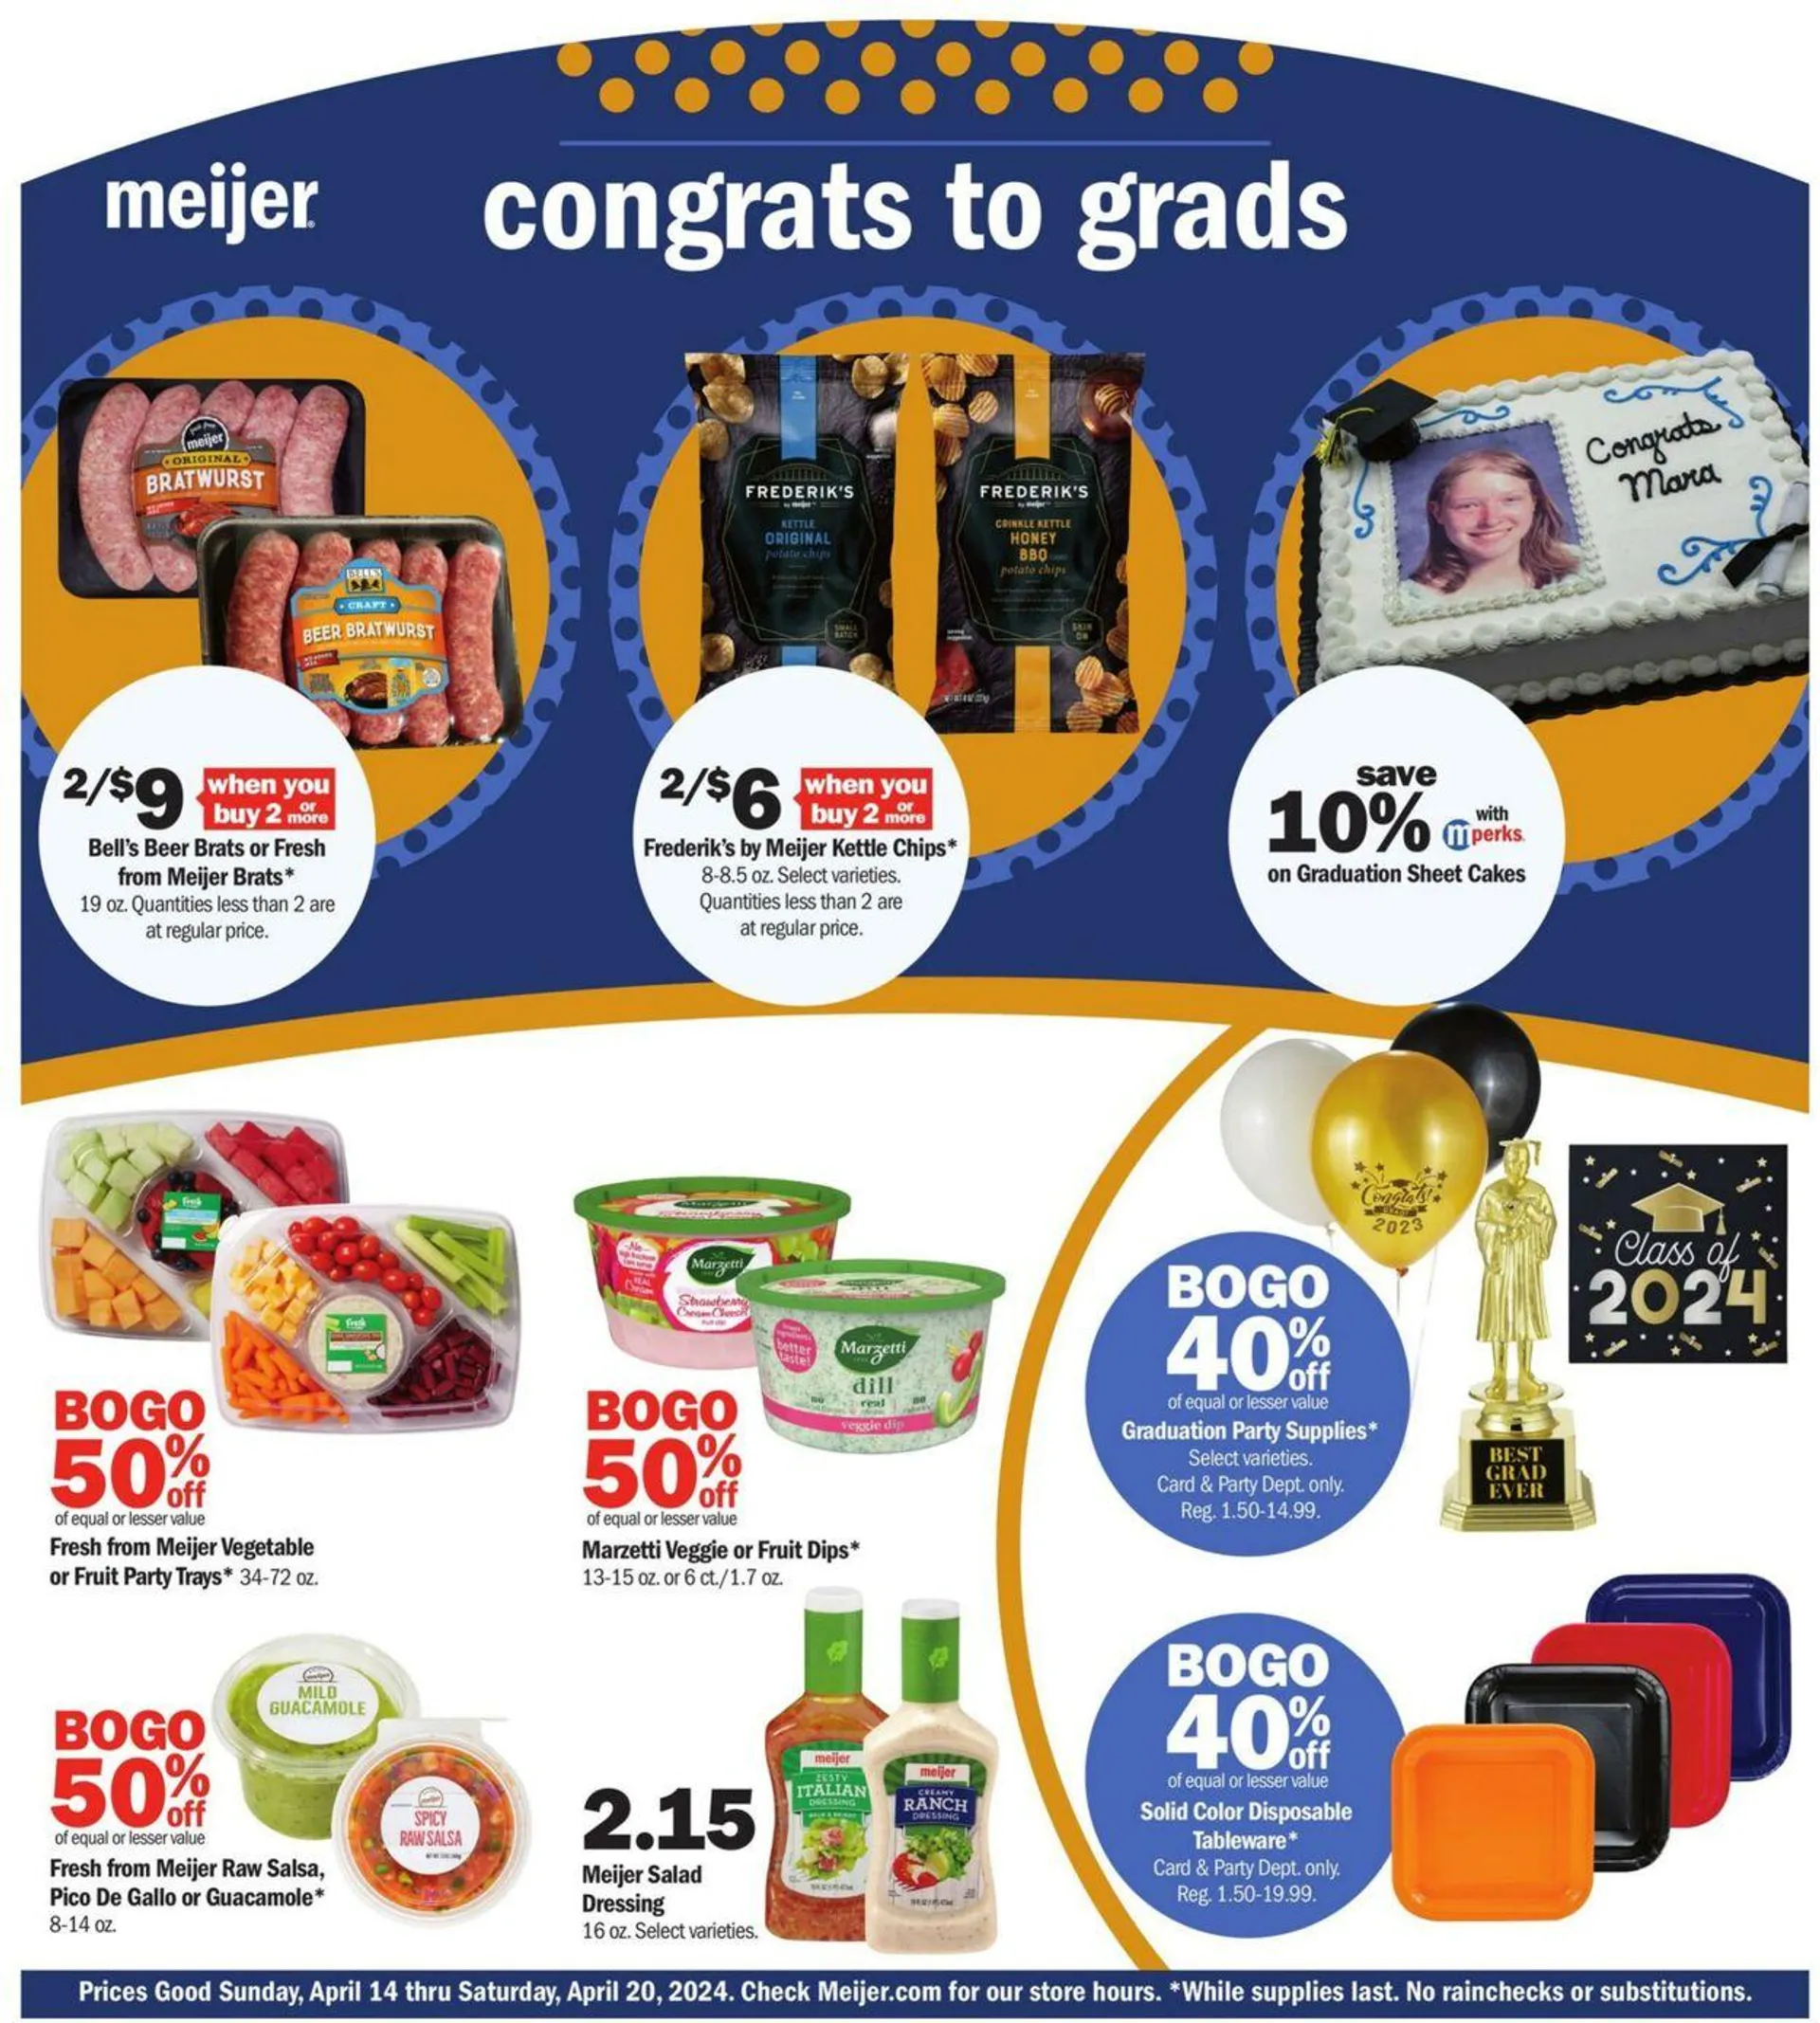 Meijer Current weekly ad - 1